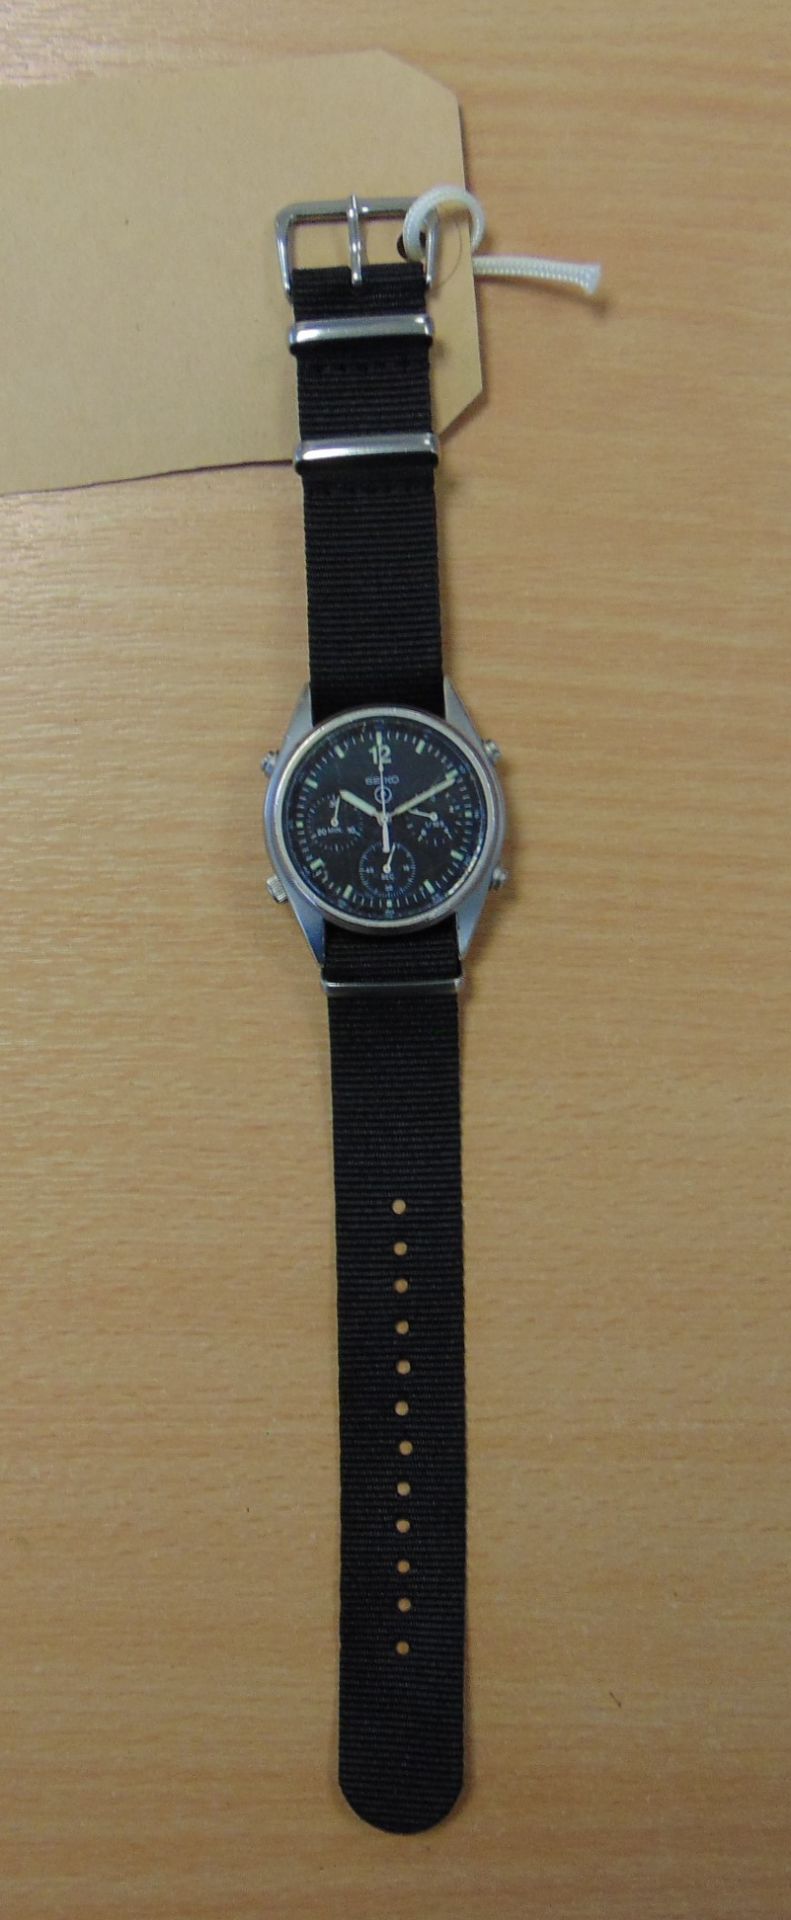 Rare Seiko Gen 1 Pilots Chrono RAF Harrier Force Issue - Image 5 of 6